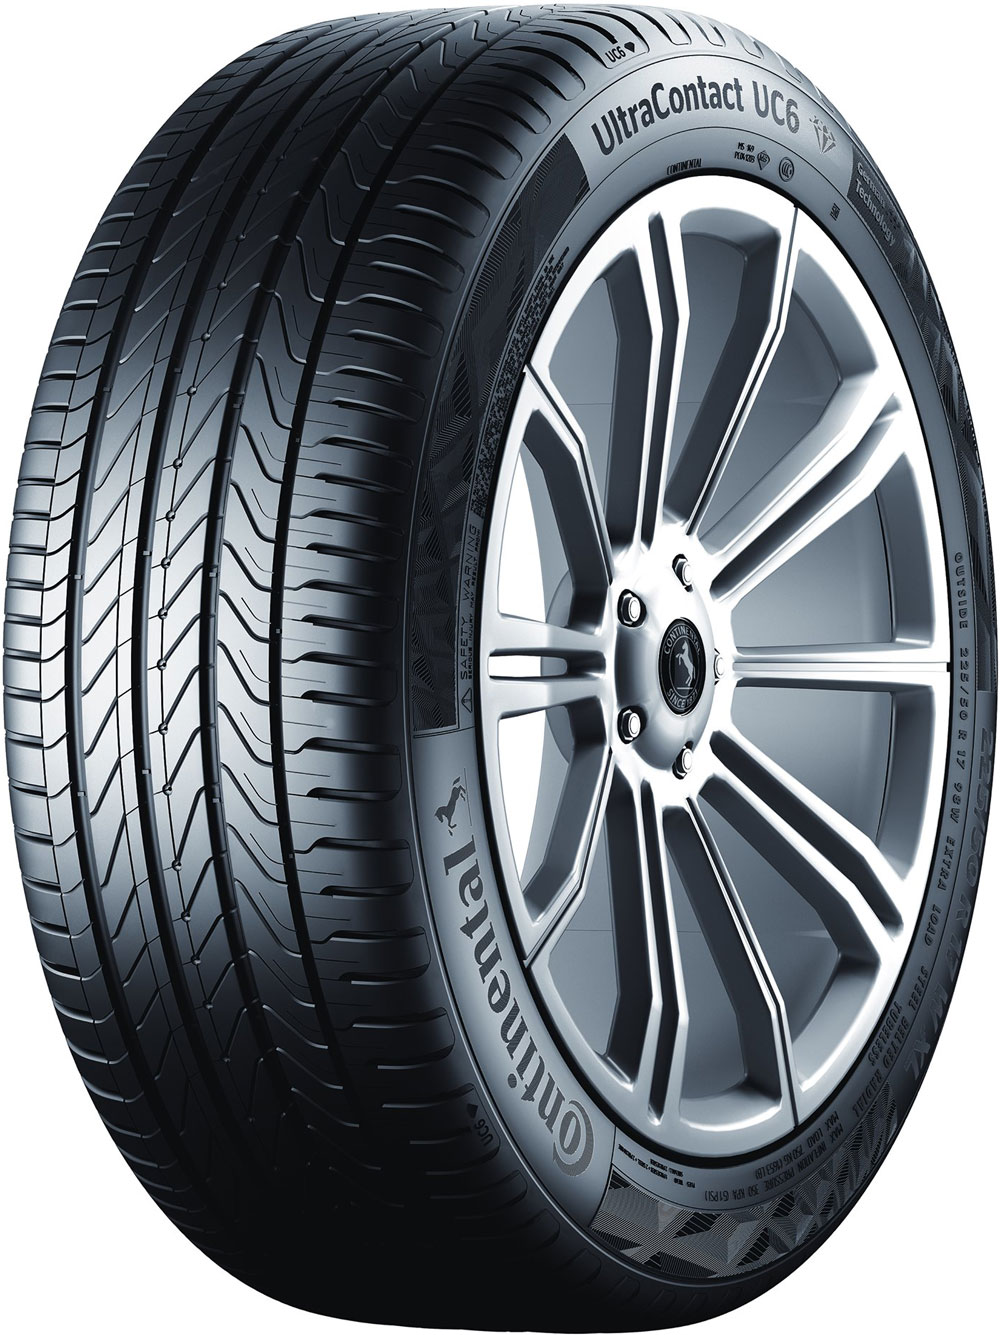 Anvelope auto CONTINENTAL UCFR 215/45 R17 87V